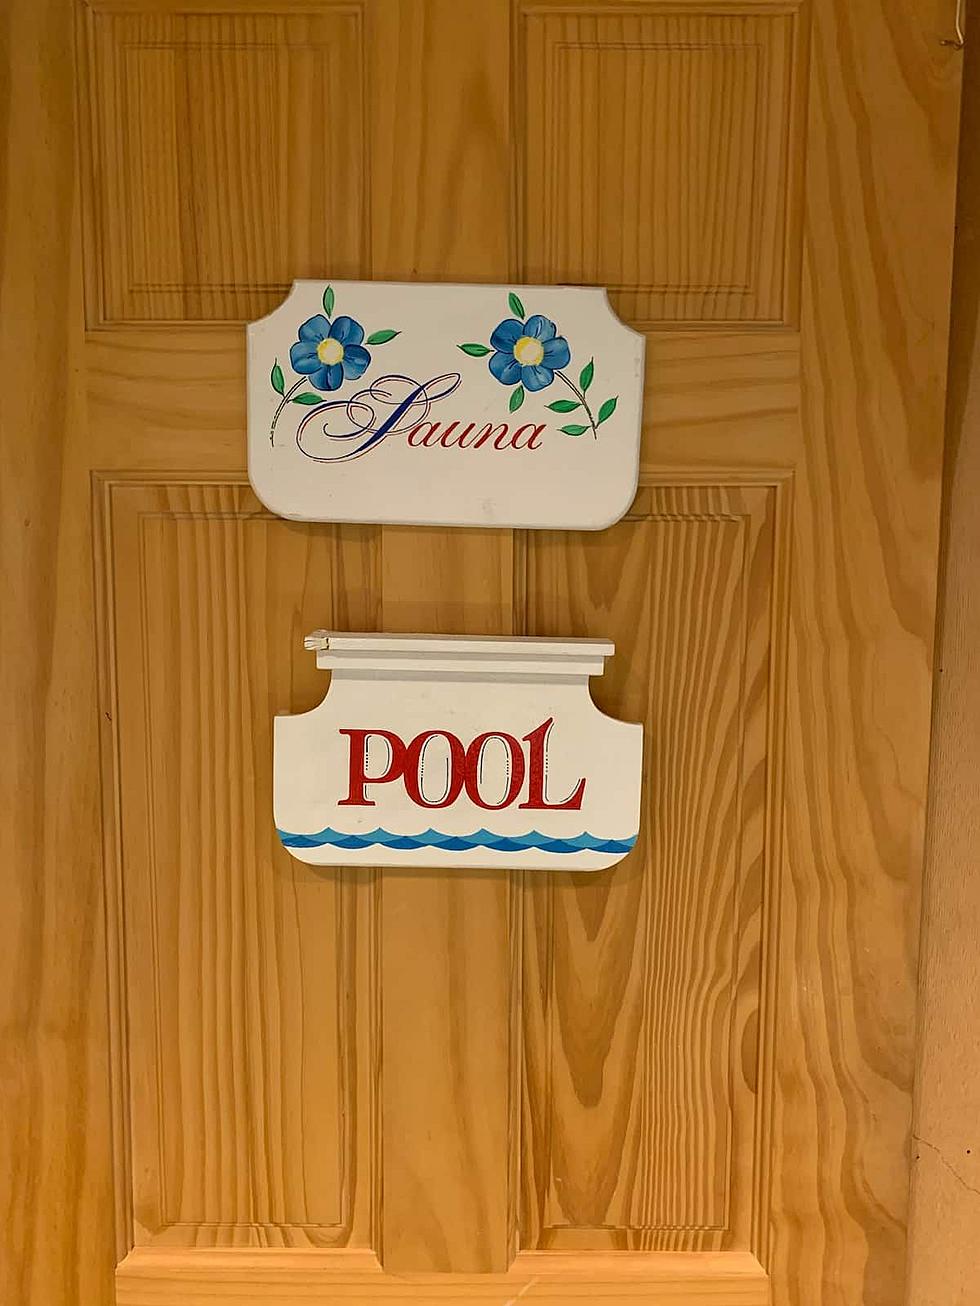 This Airbnb Has an Indoor Pool and It’s Just 45 Minutes From Flint [PHOTOS]